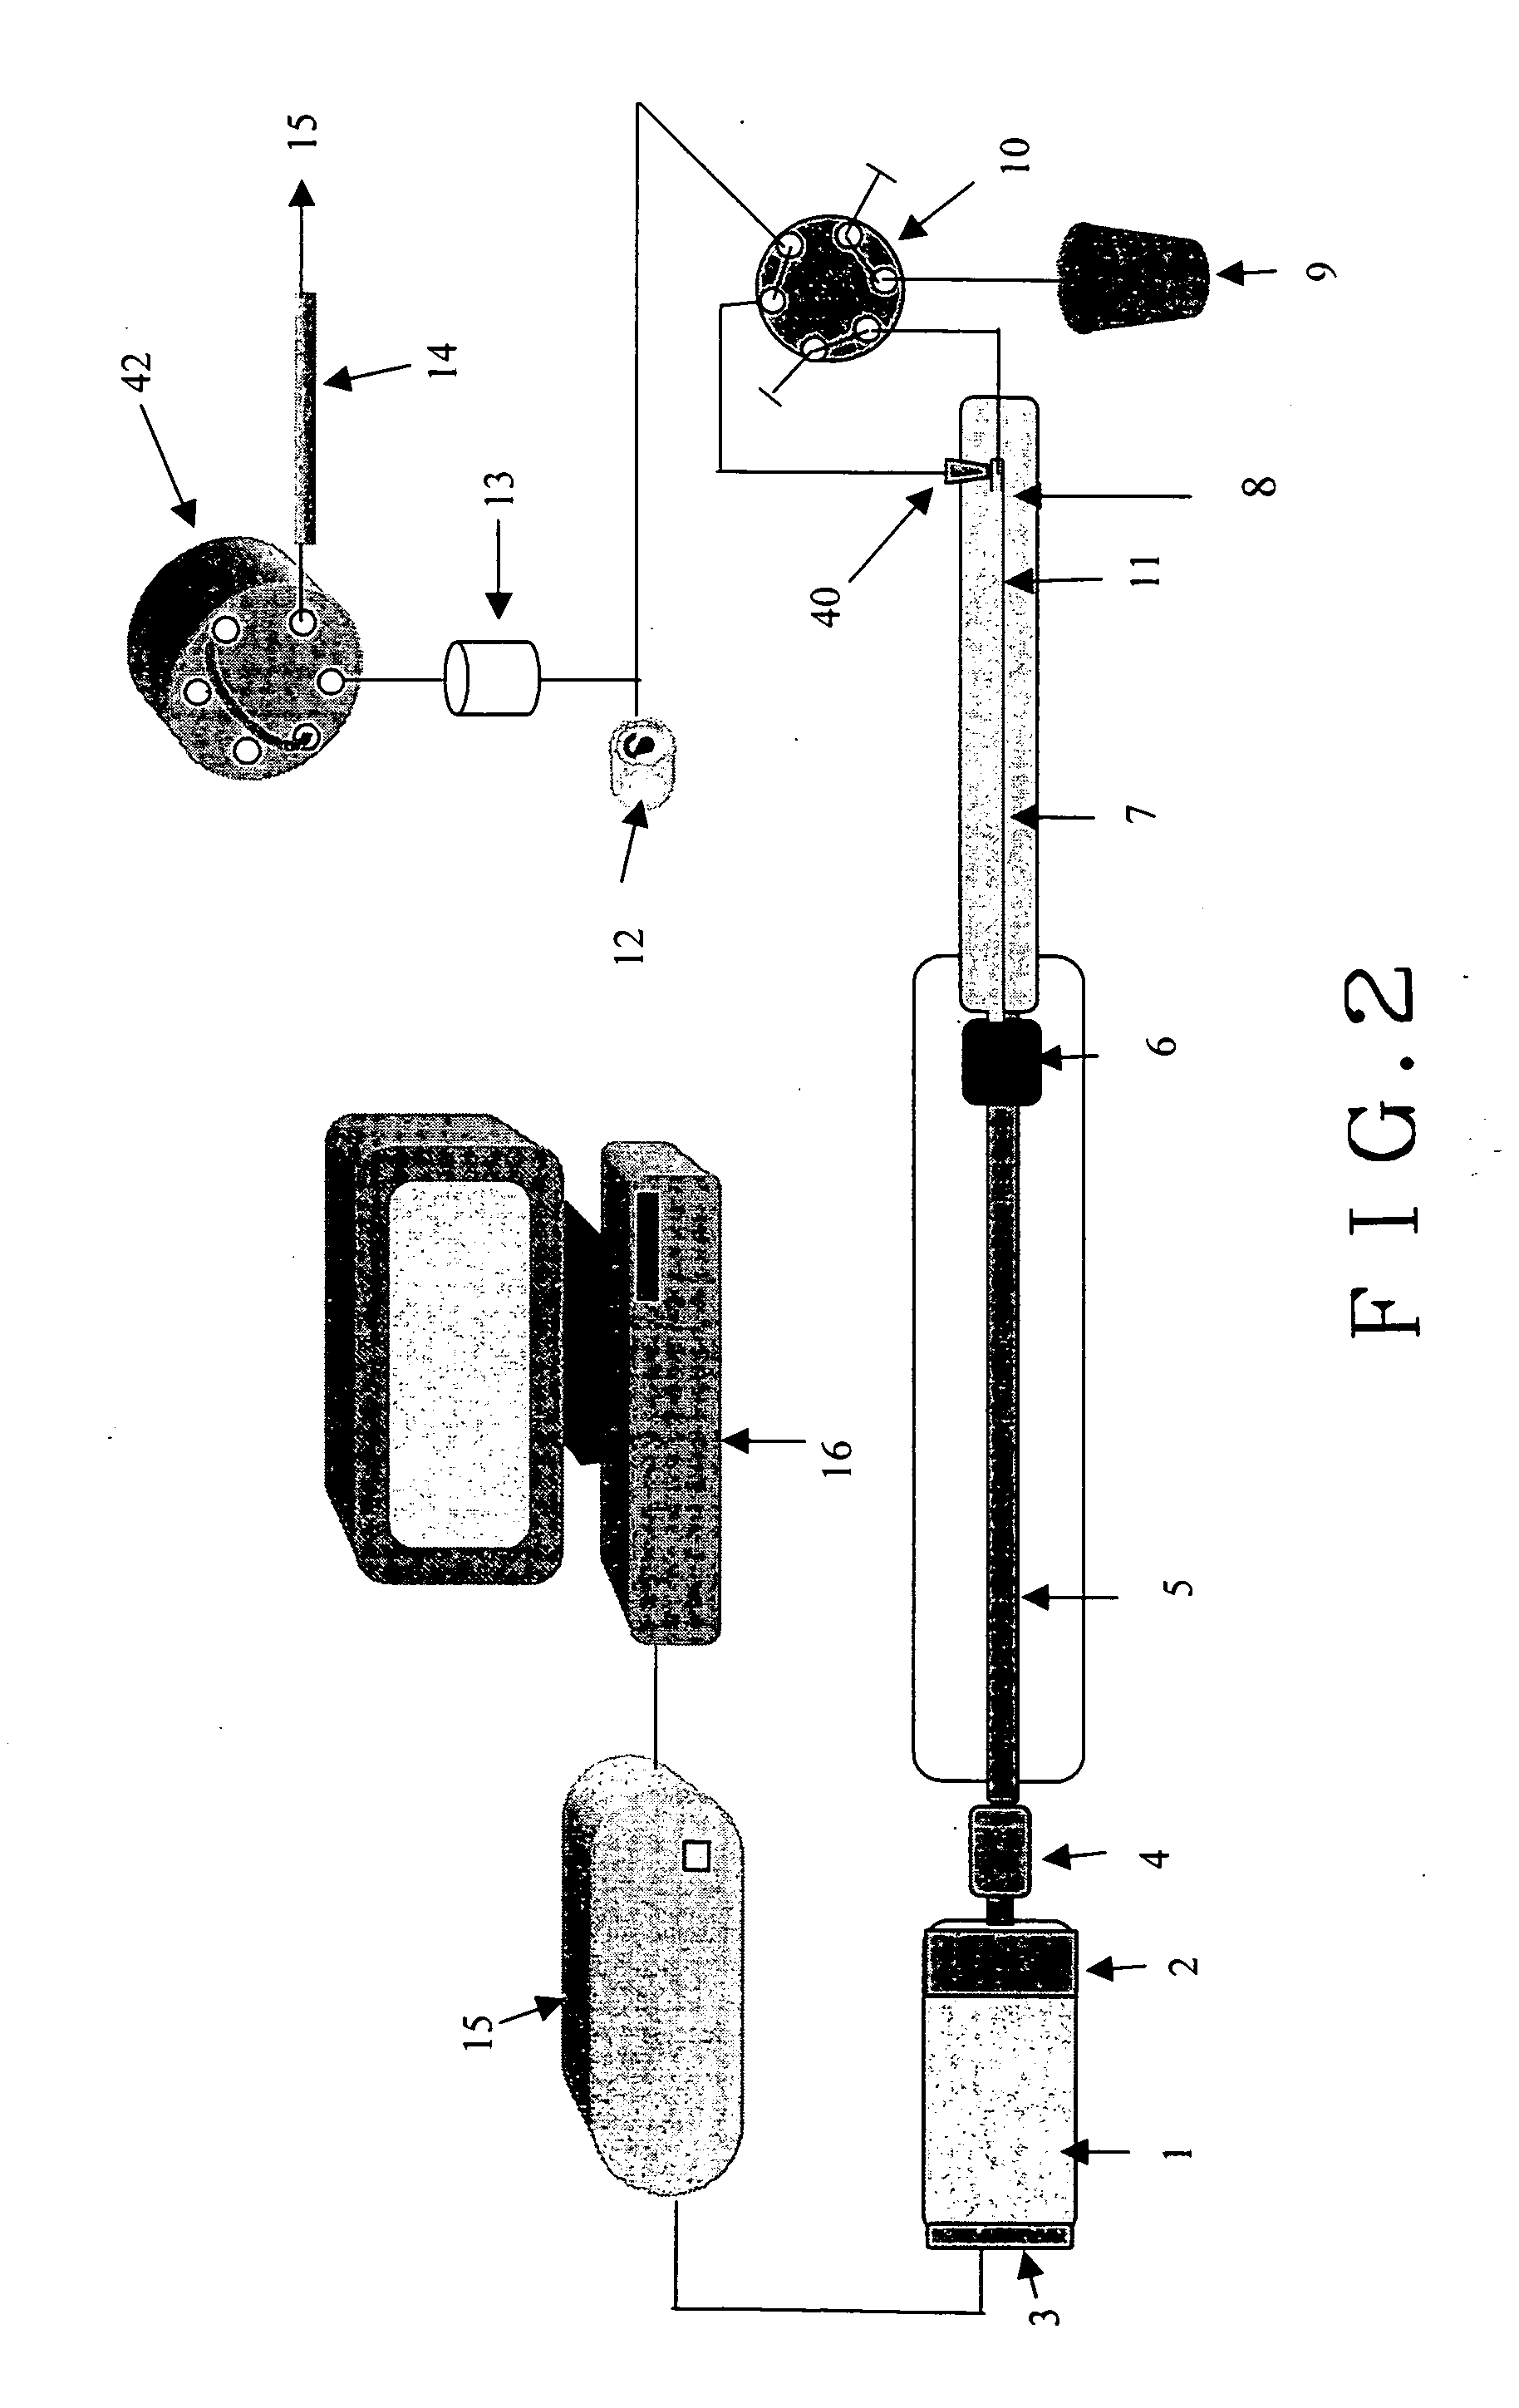 Multidimensional pump apparatus and method for fully automated complex mixtures separation, identification, and quantification